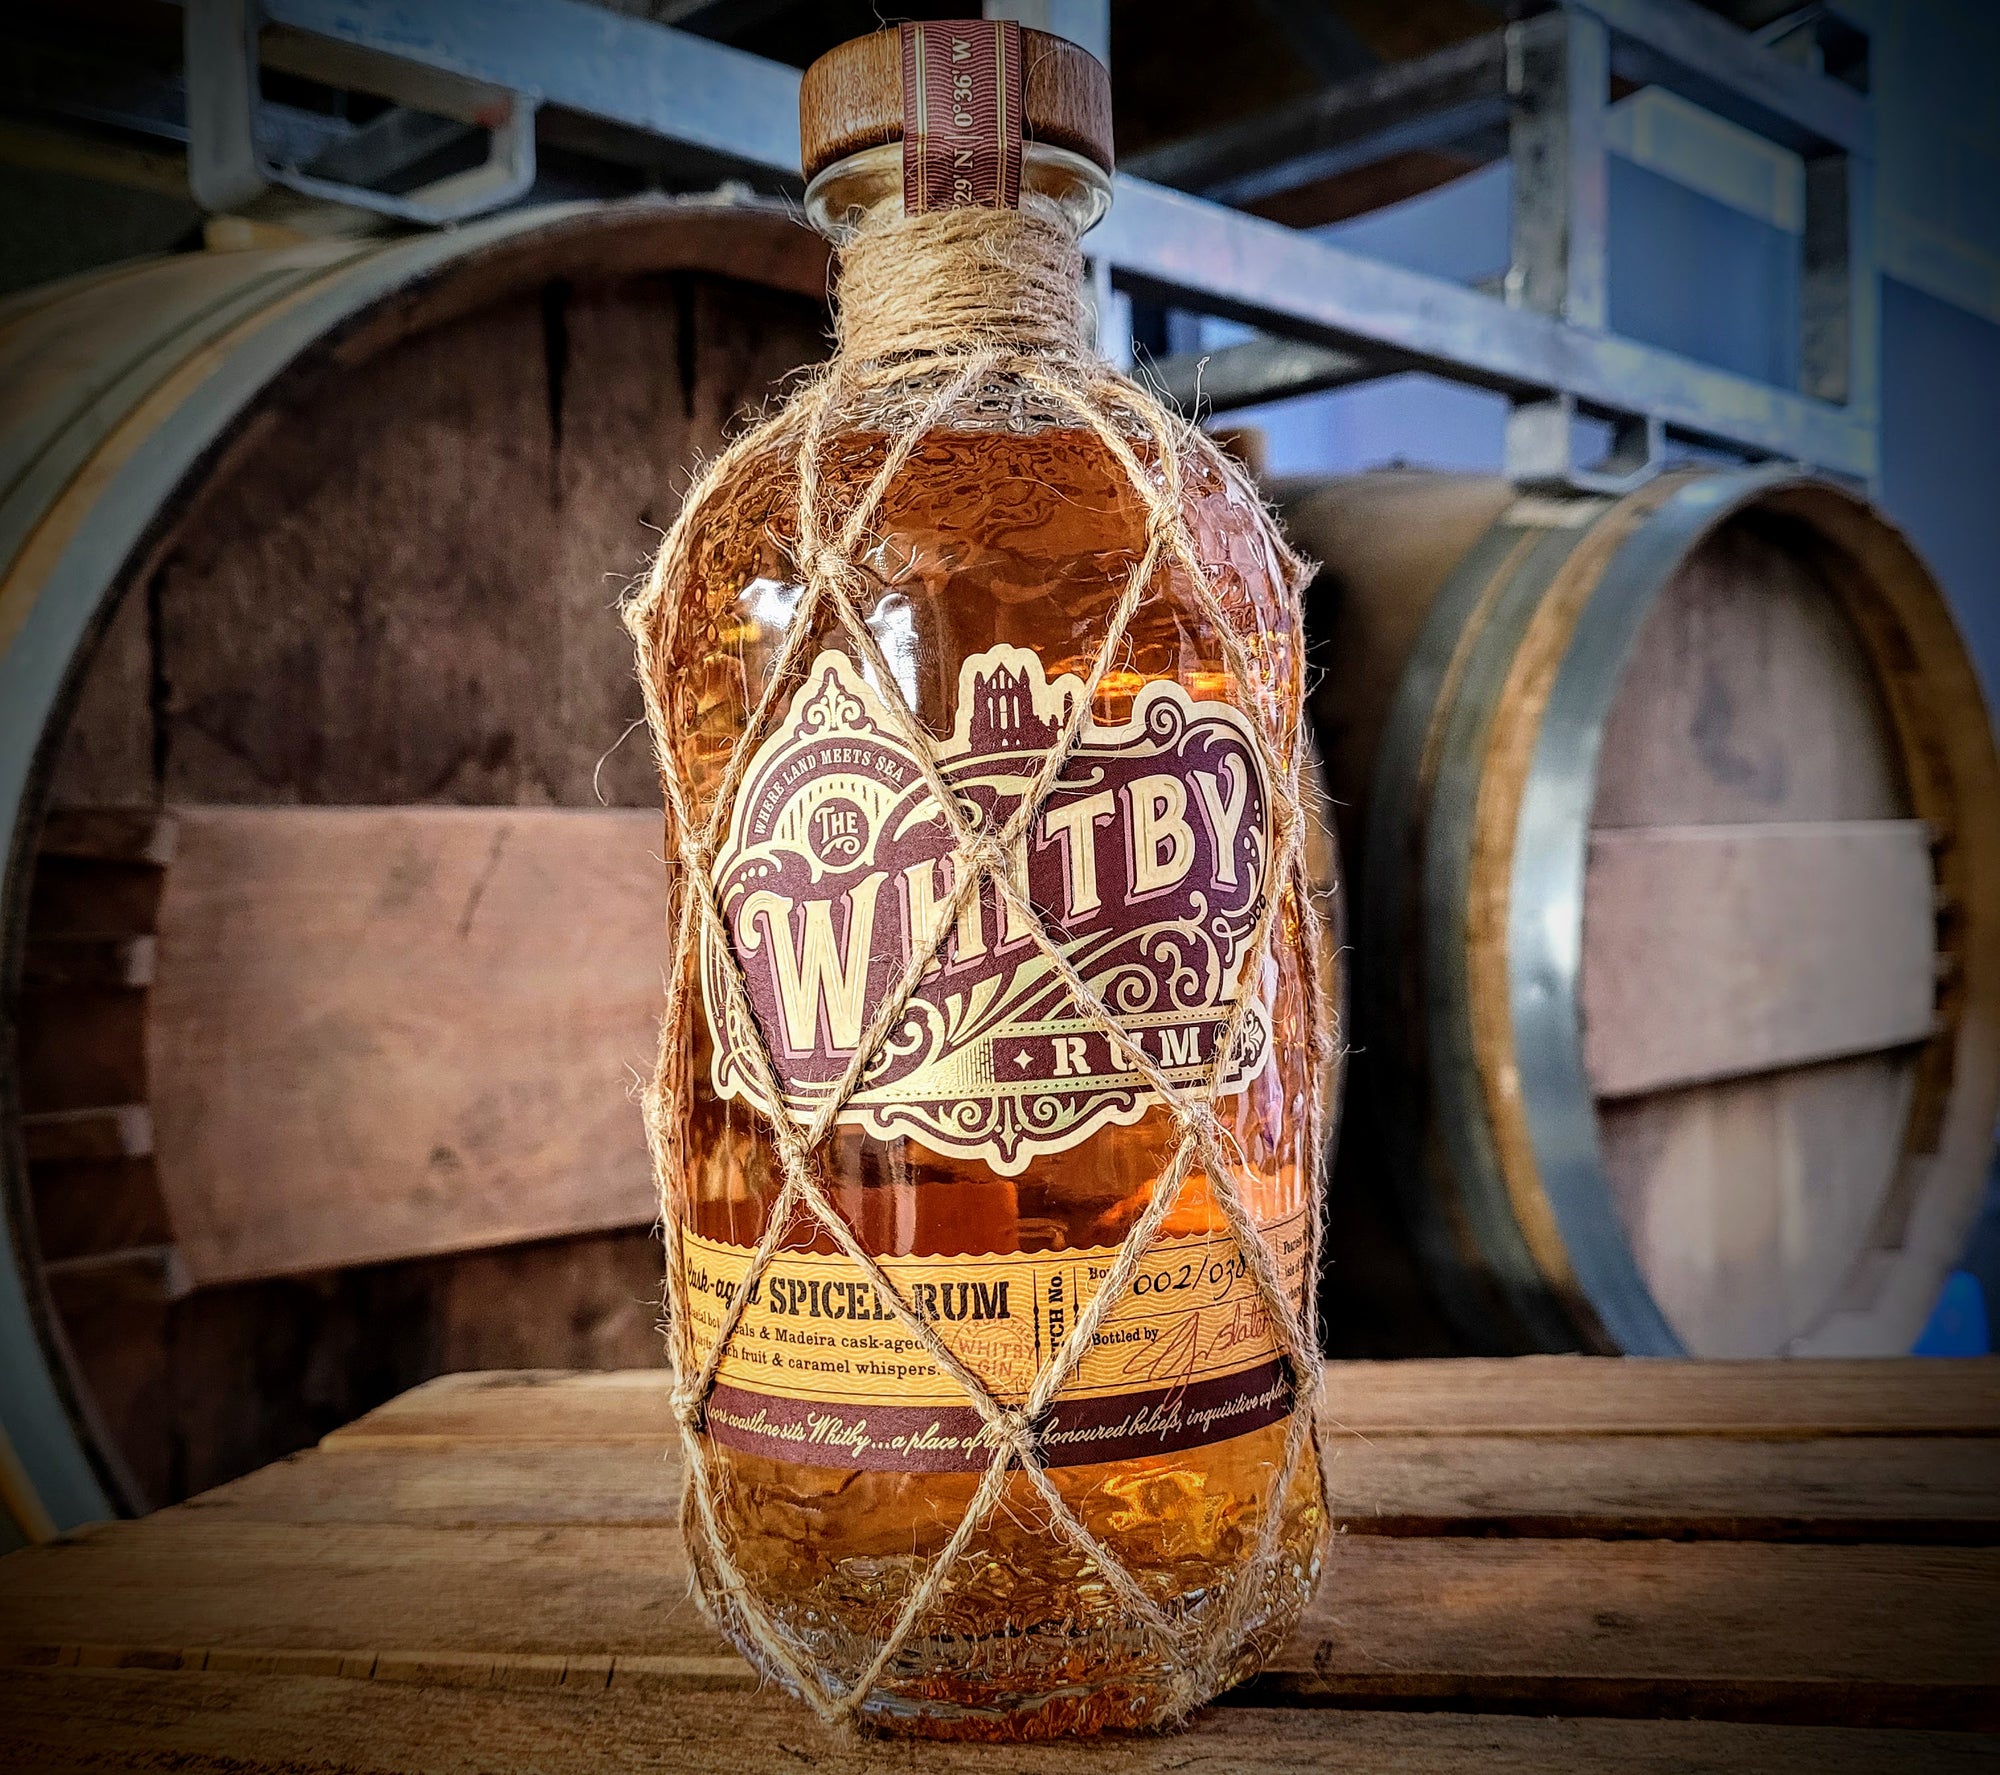 Ahoy there.. I spy a Whitby Spiced Rum